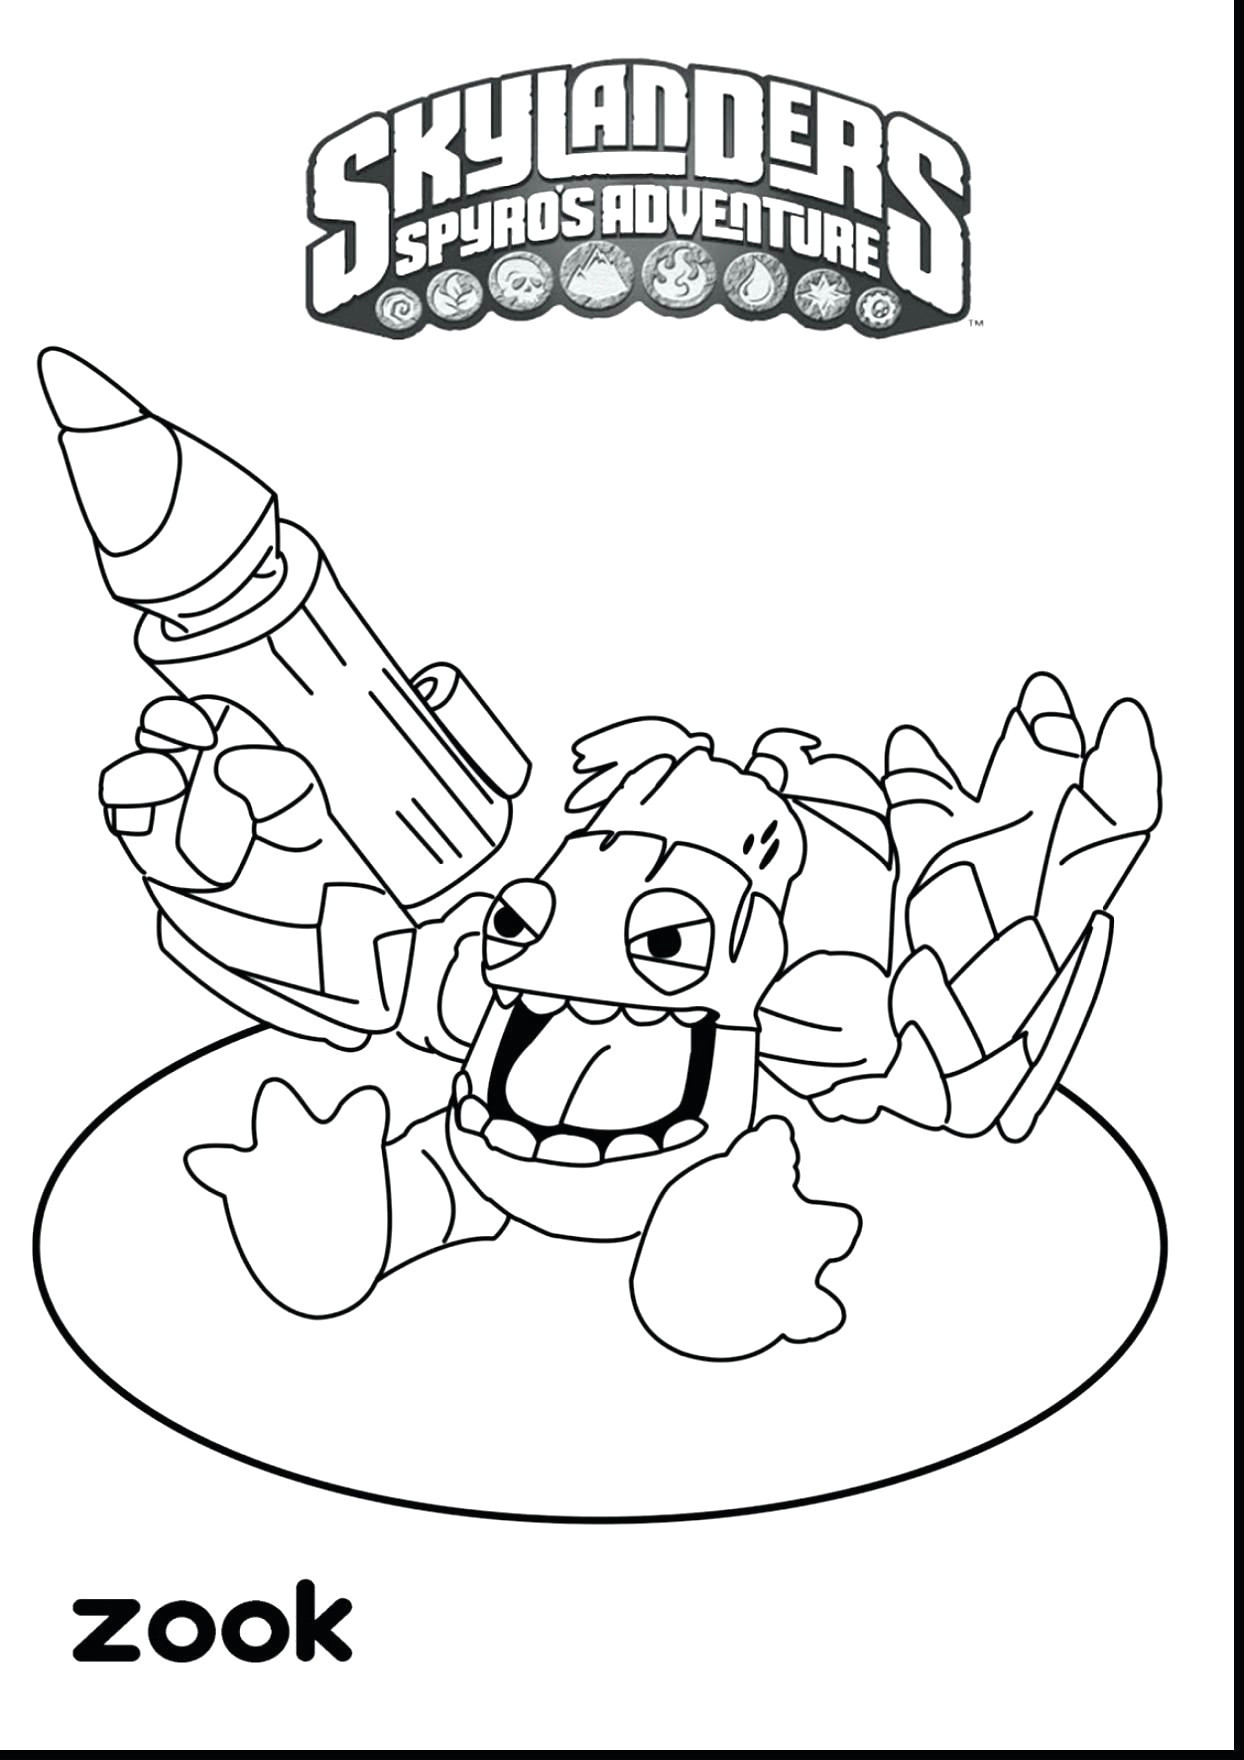 Easy Drawing and Colouring Www Colouring Pages Brilliant Easy to Draw Instruments Home Coloring